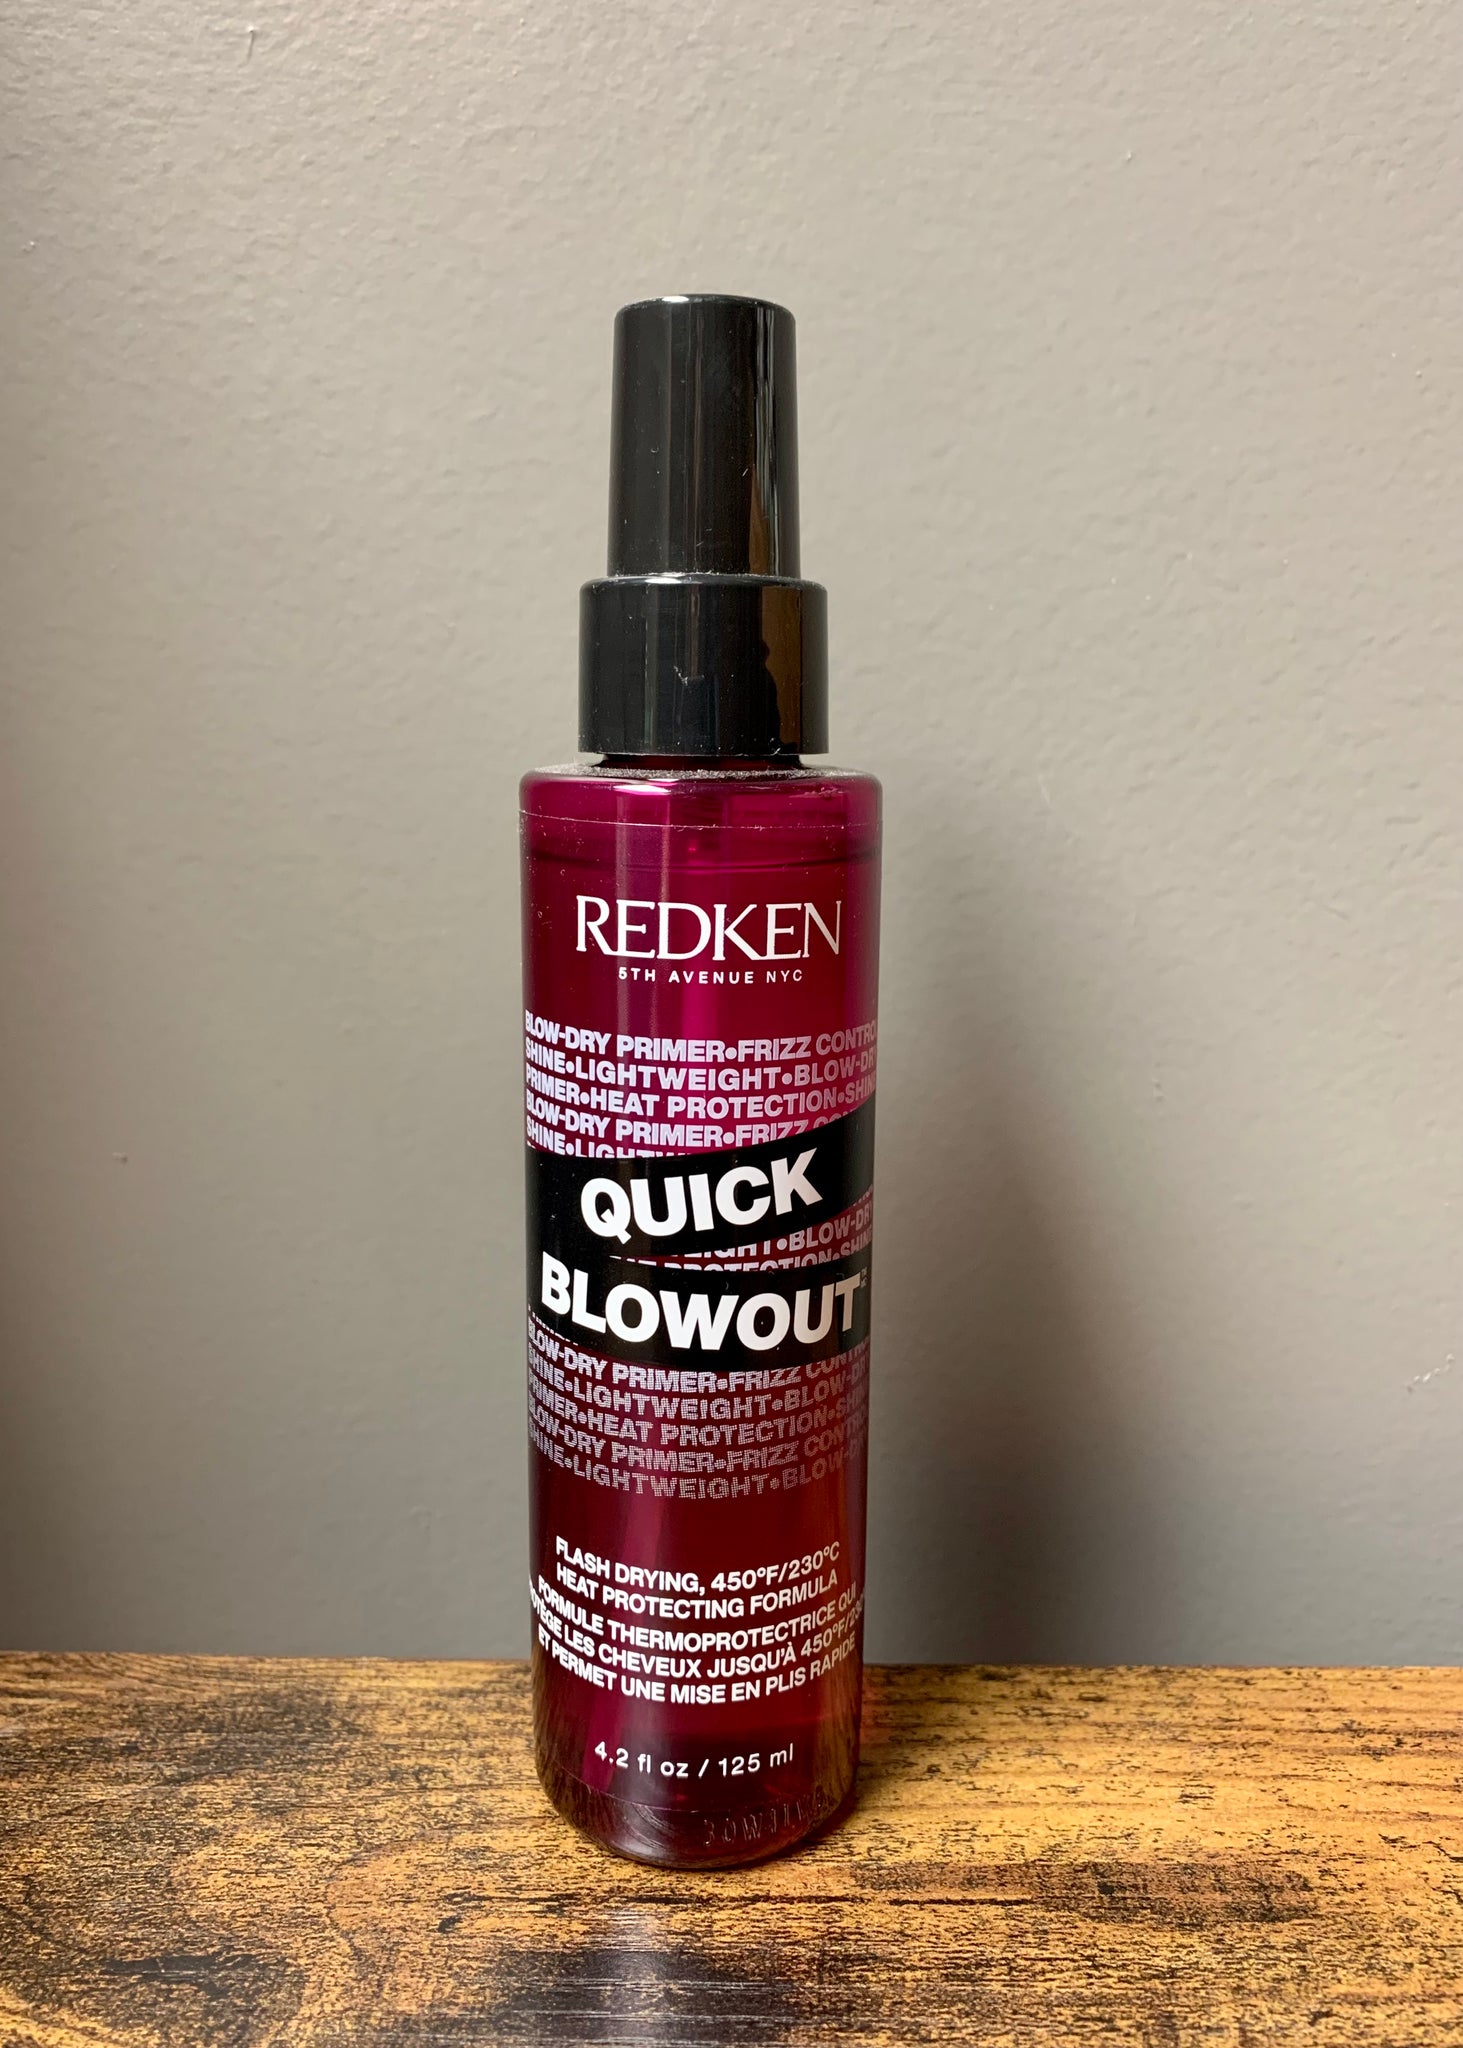 Quick Blowout Heat Protecting Blowdry Spray